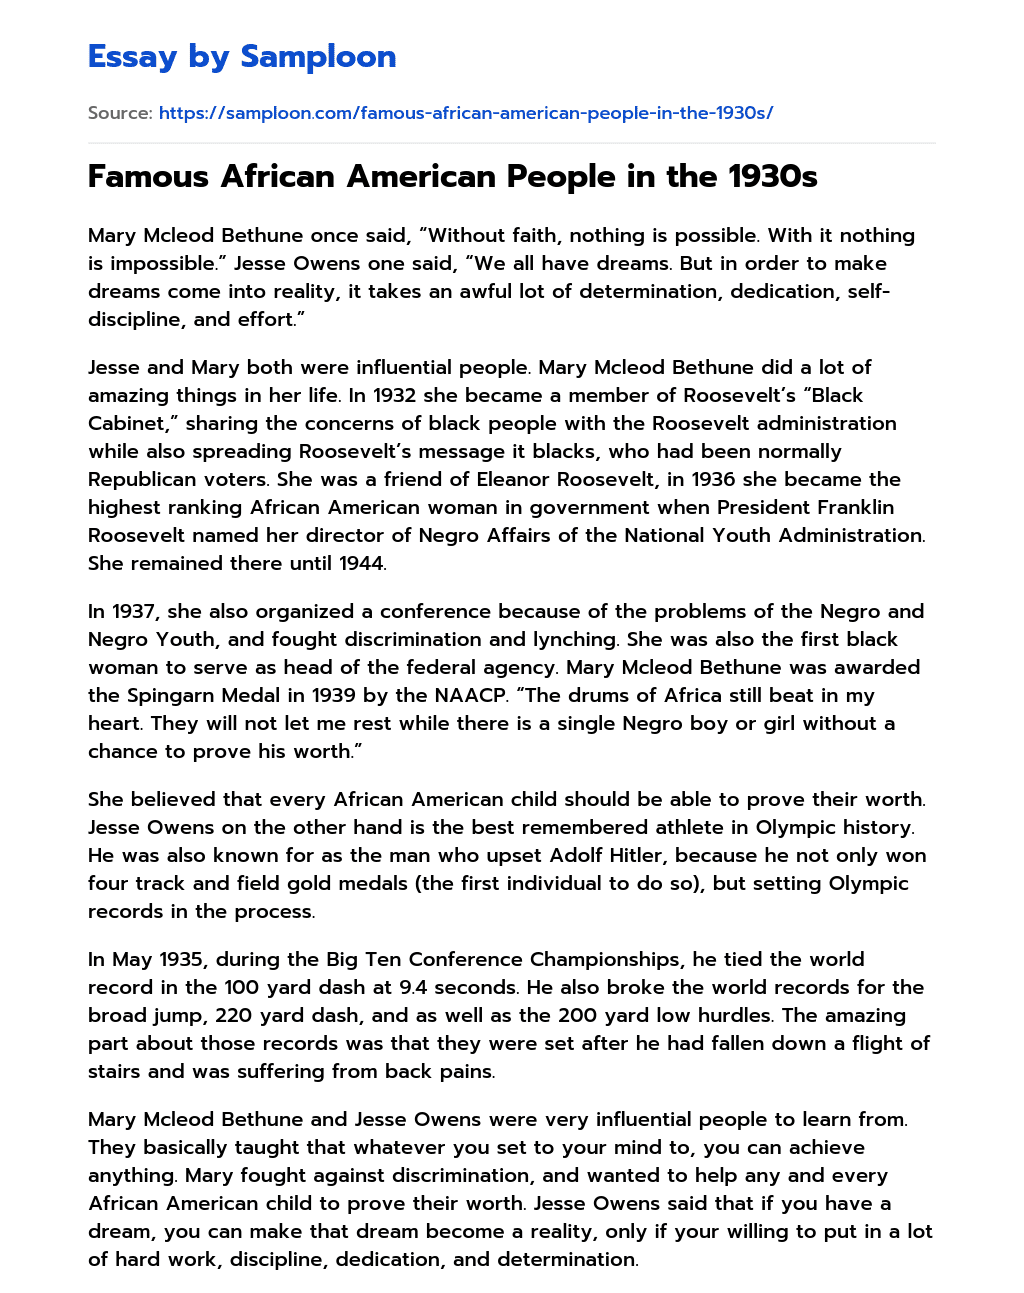 Famous African American People in the 1930s  essay